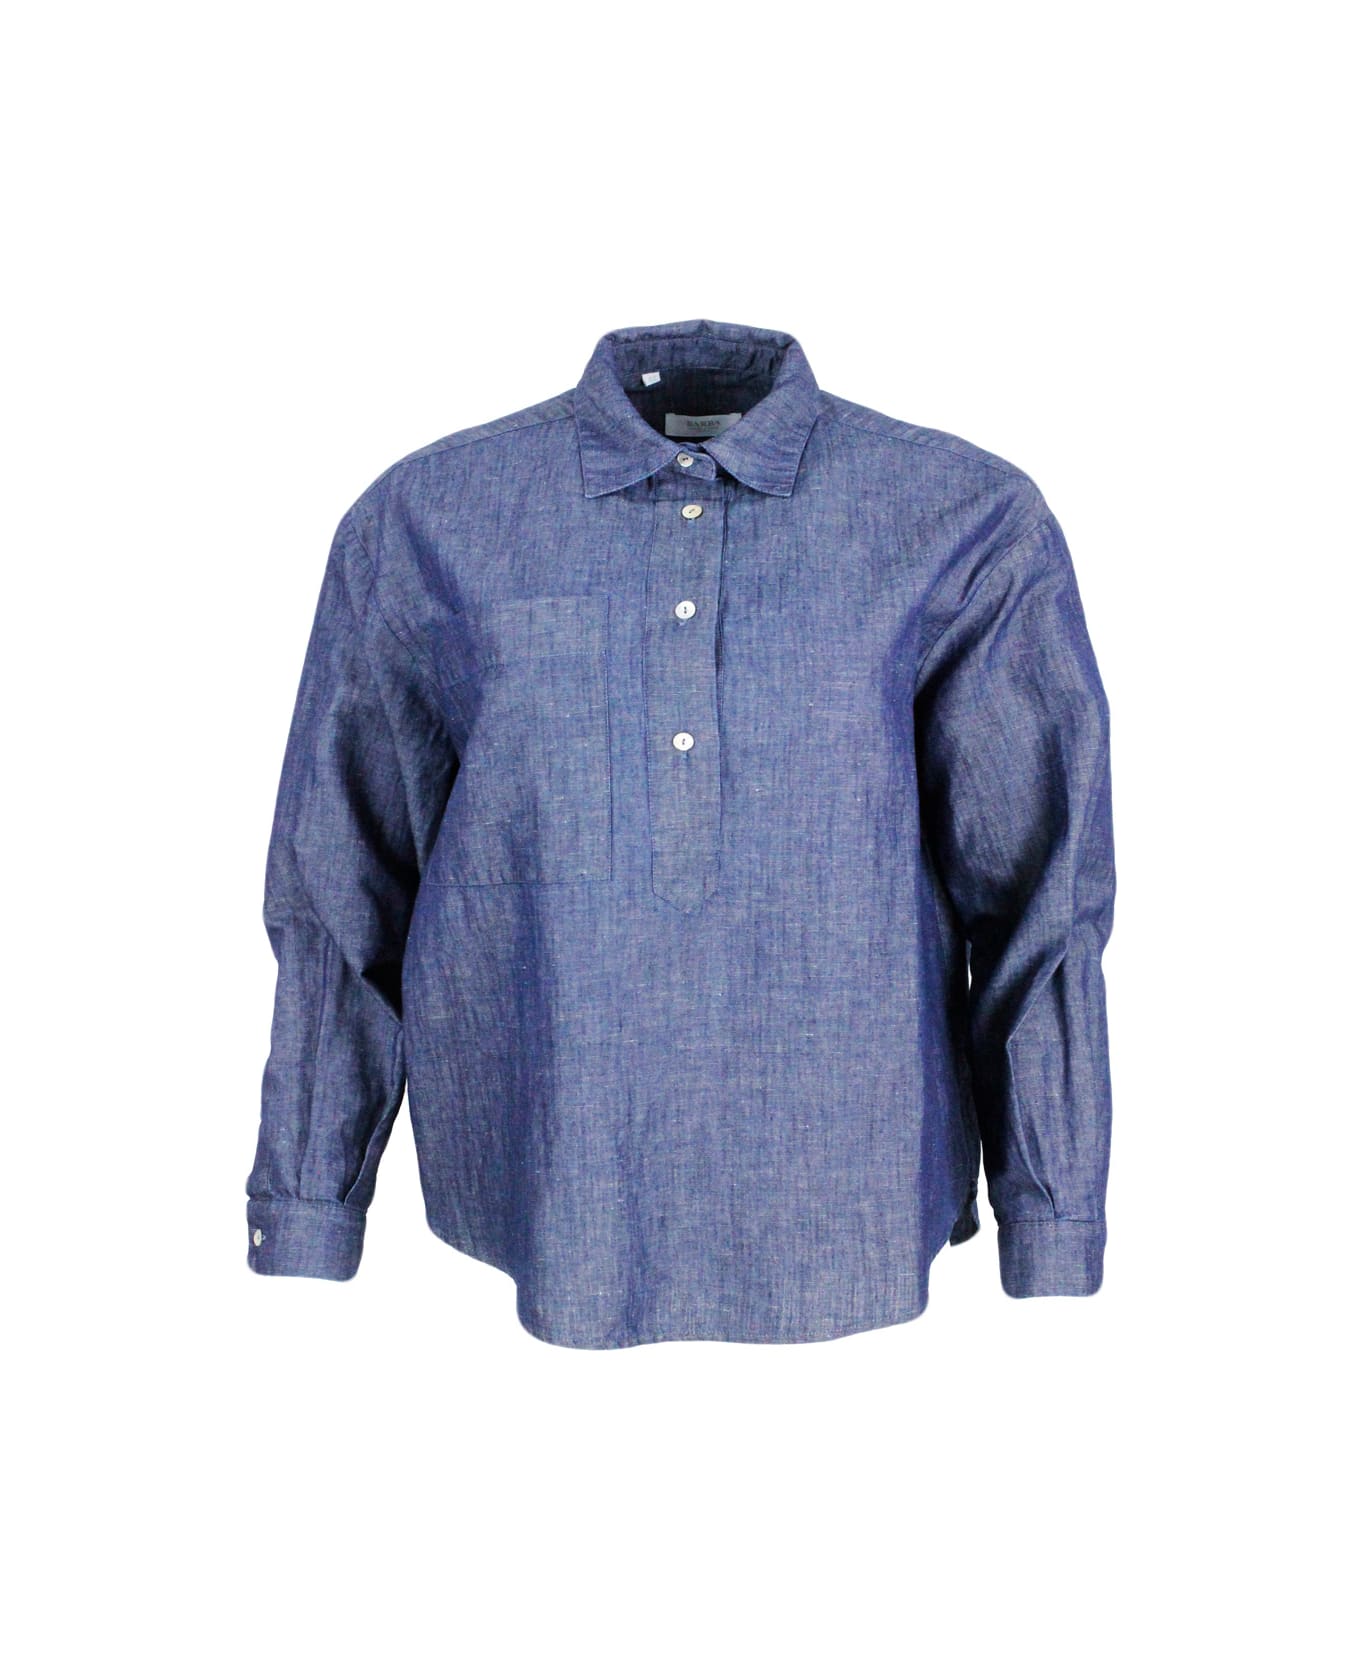 Barba Napoli Lightweight Denim-effect Pull-on Shirt In Linen Cotton With Four Buttons And Chest Pocket - Denim